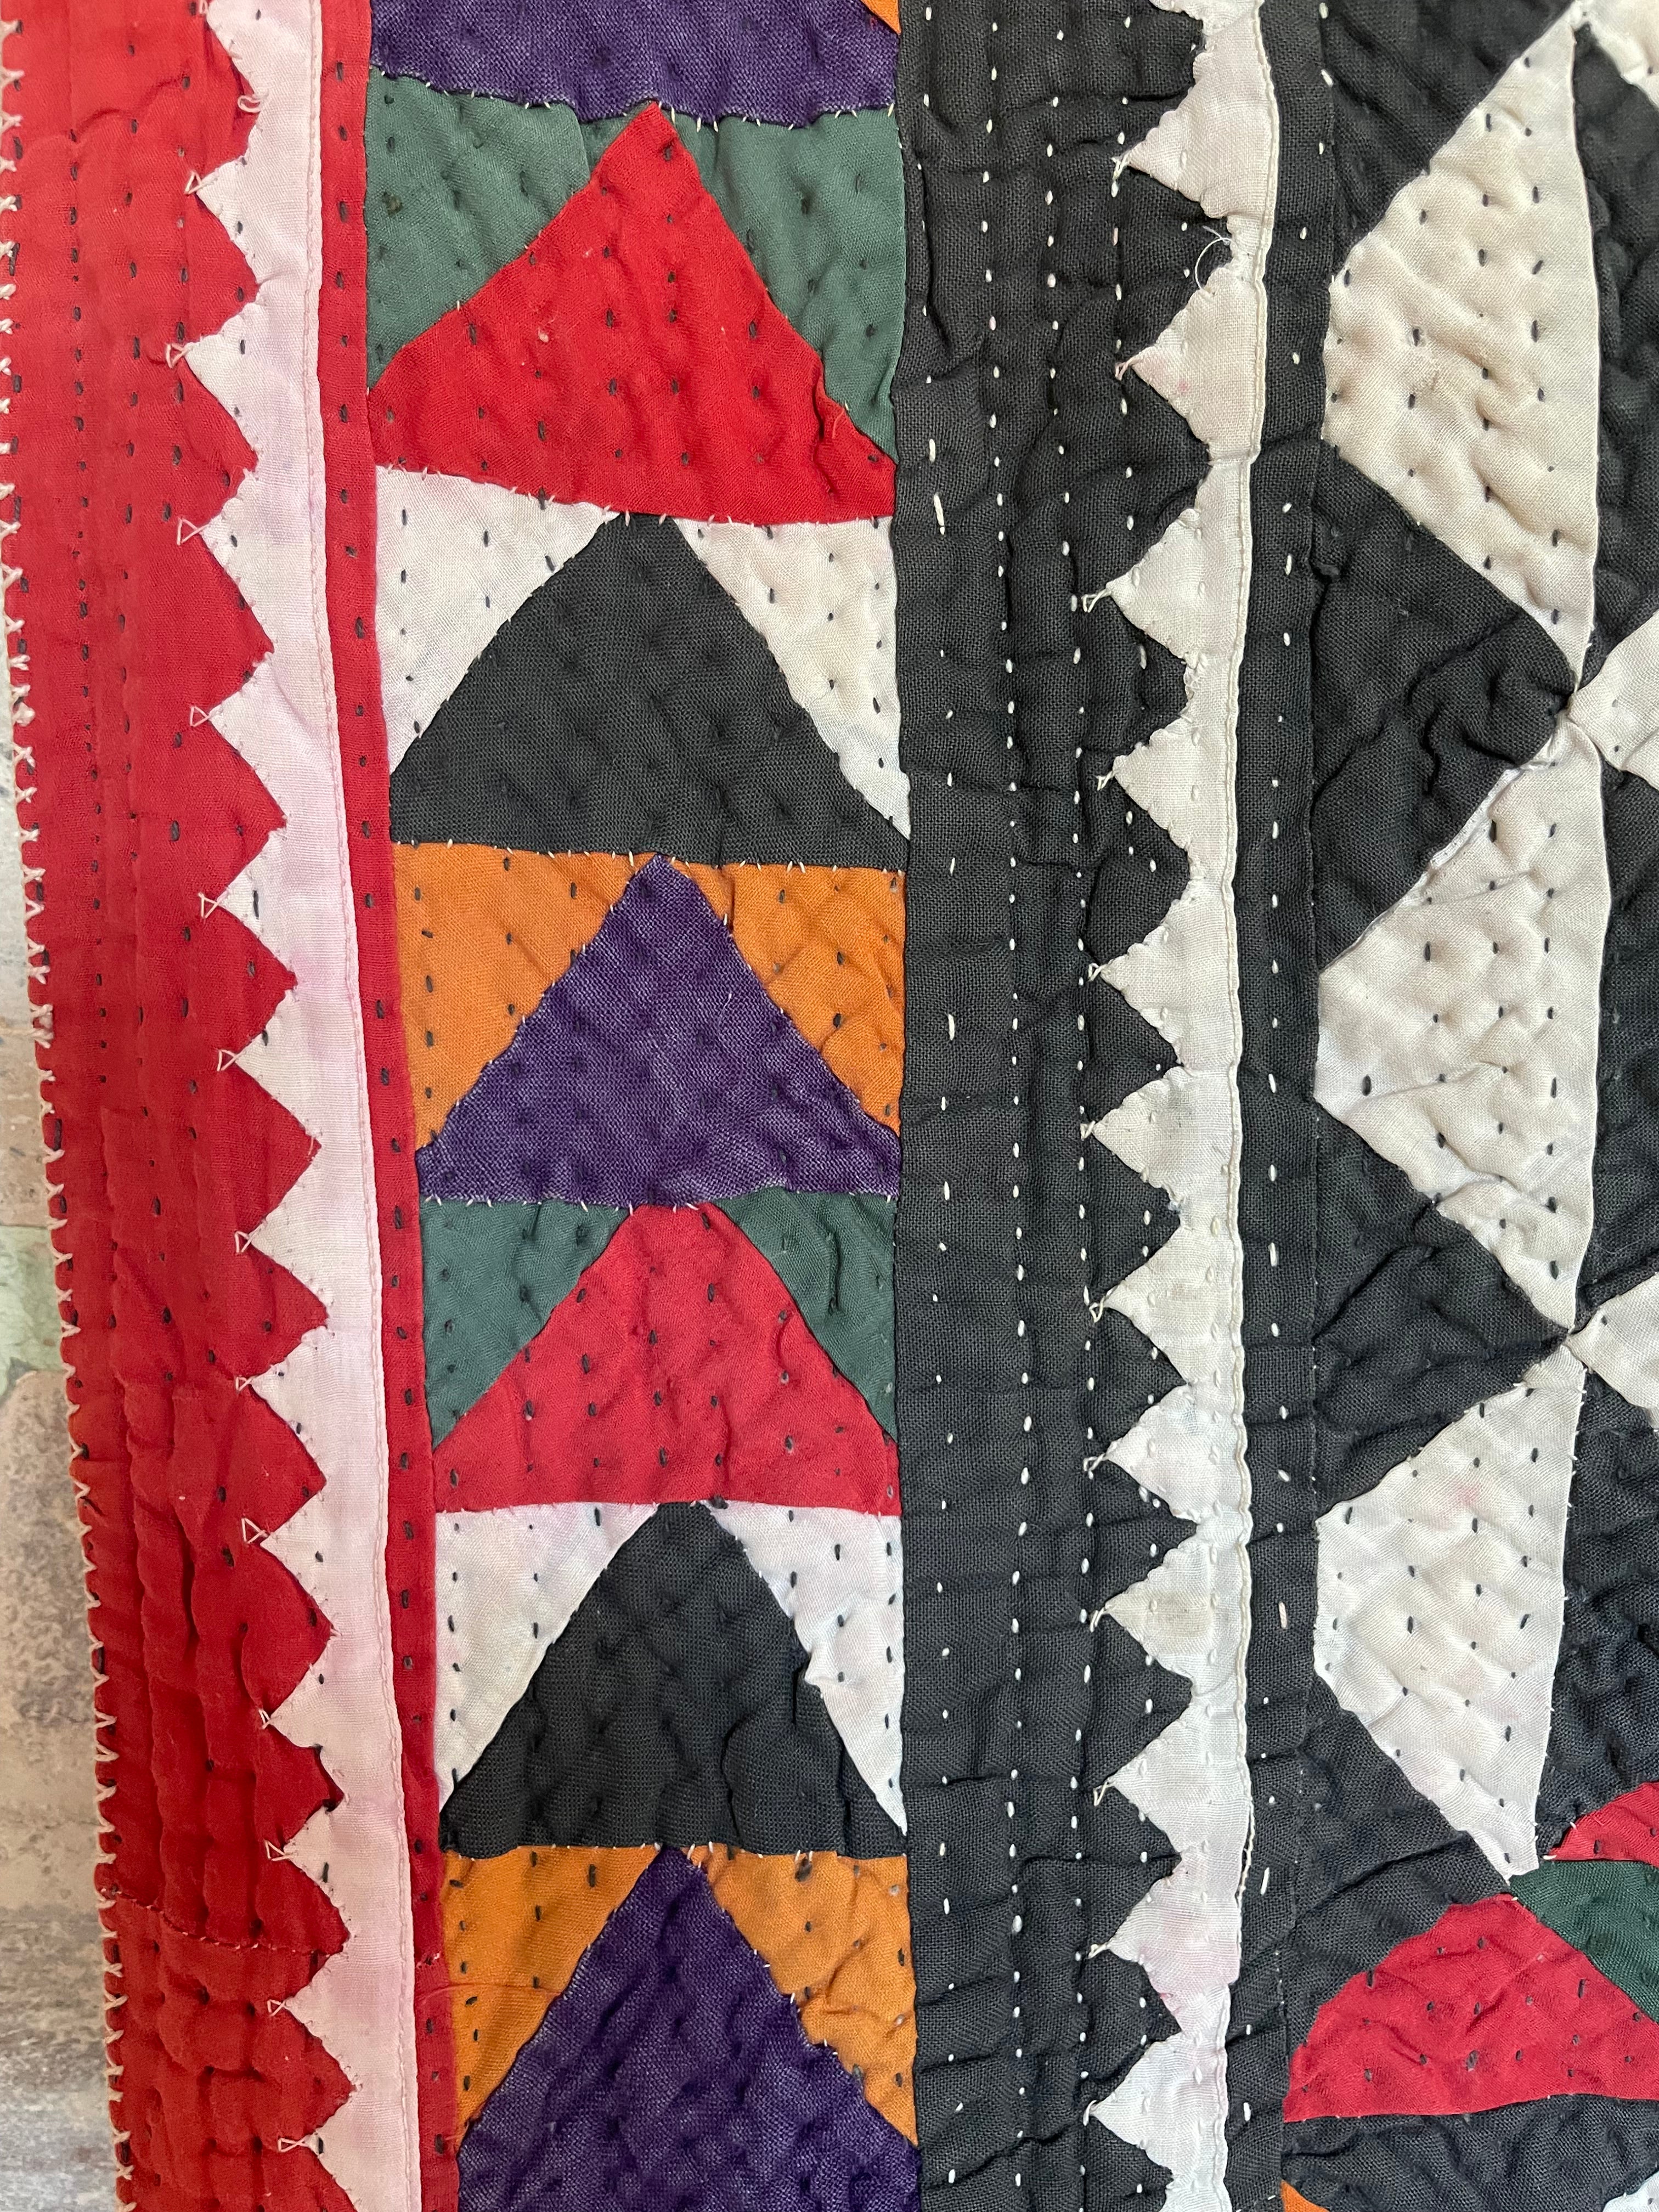 This ralli illustrates one of the most typical everyday quilts. The color scheme is based on the old, natural dyes colors even though chemical dyes are now used. The size of the fabric used in the piecing is typical for an everyday quilt. The geometric design is bold, especially when viewed from a distance.